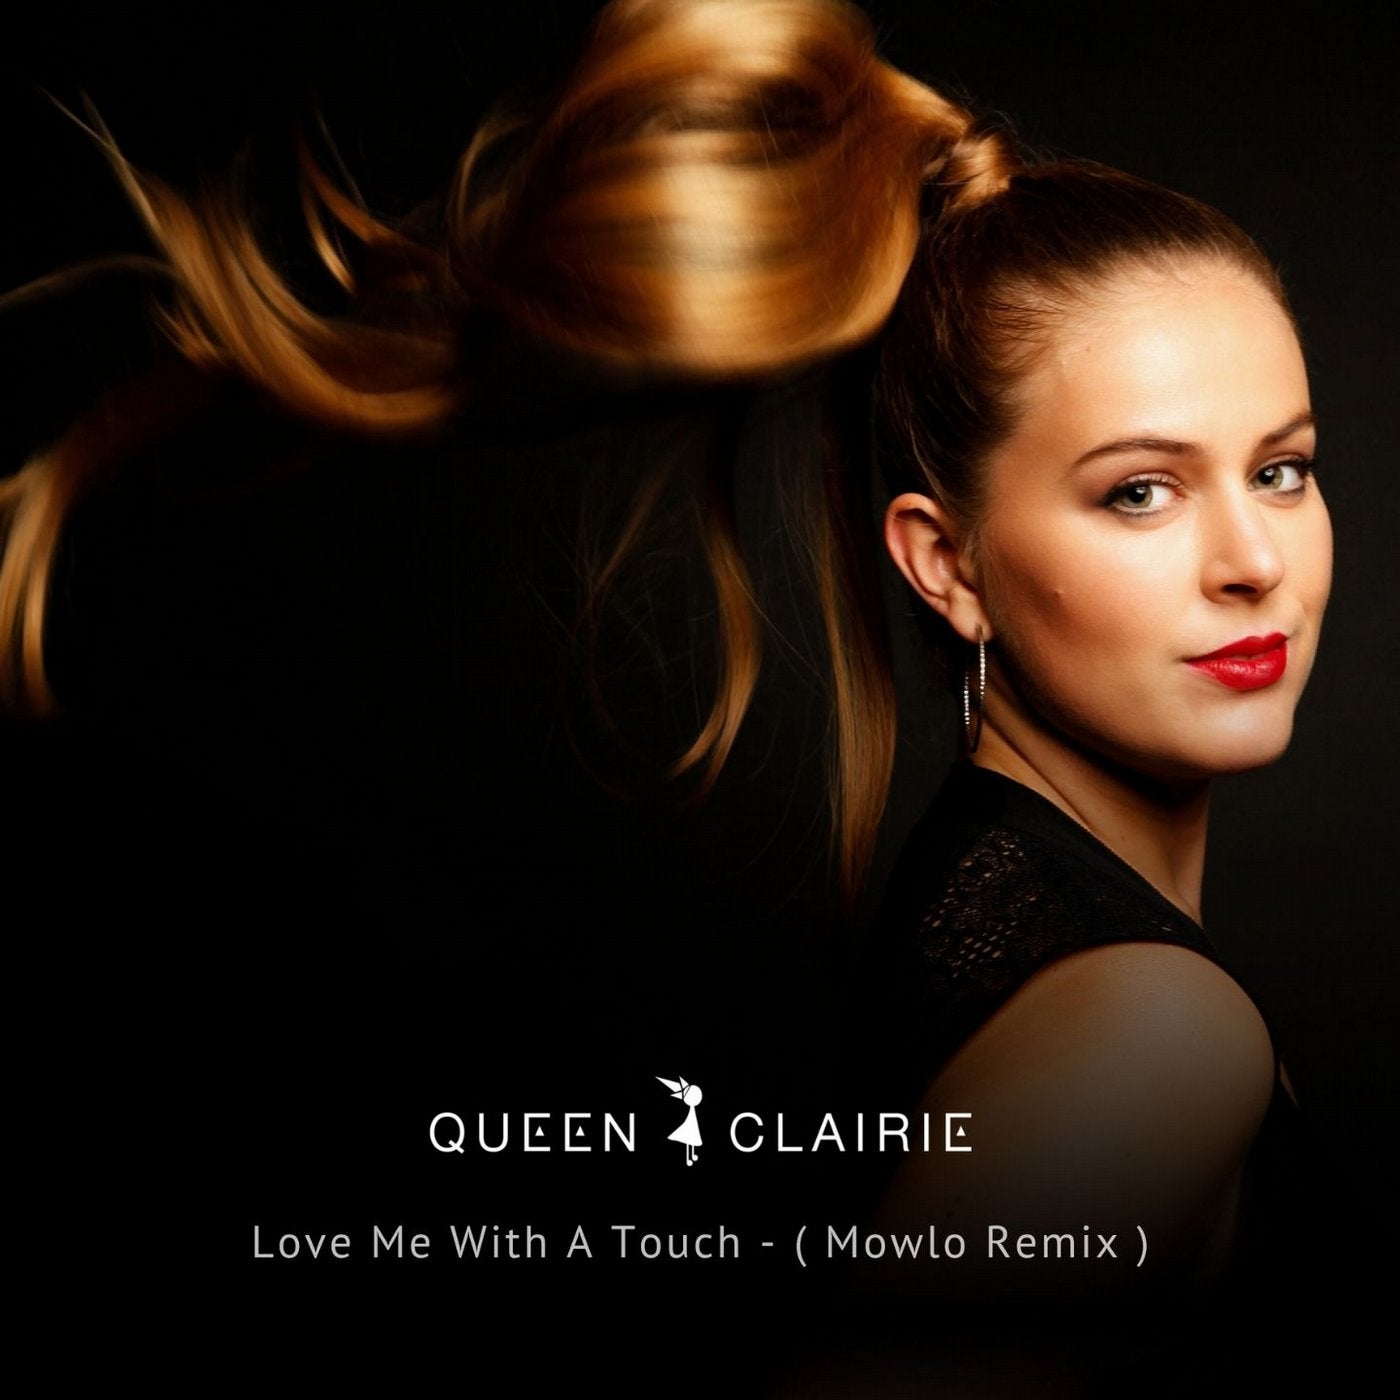 Love Me with a Touch (Mowlo Remix)